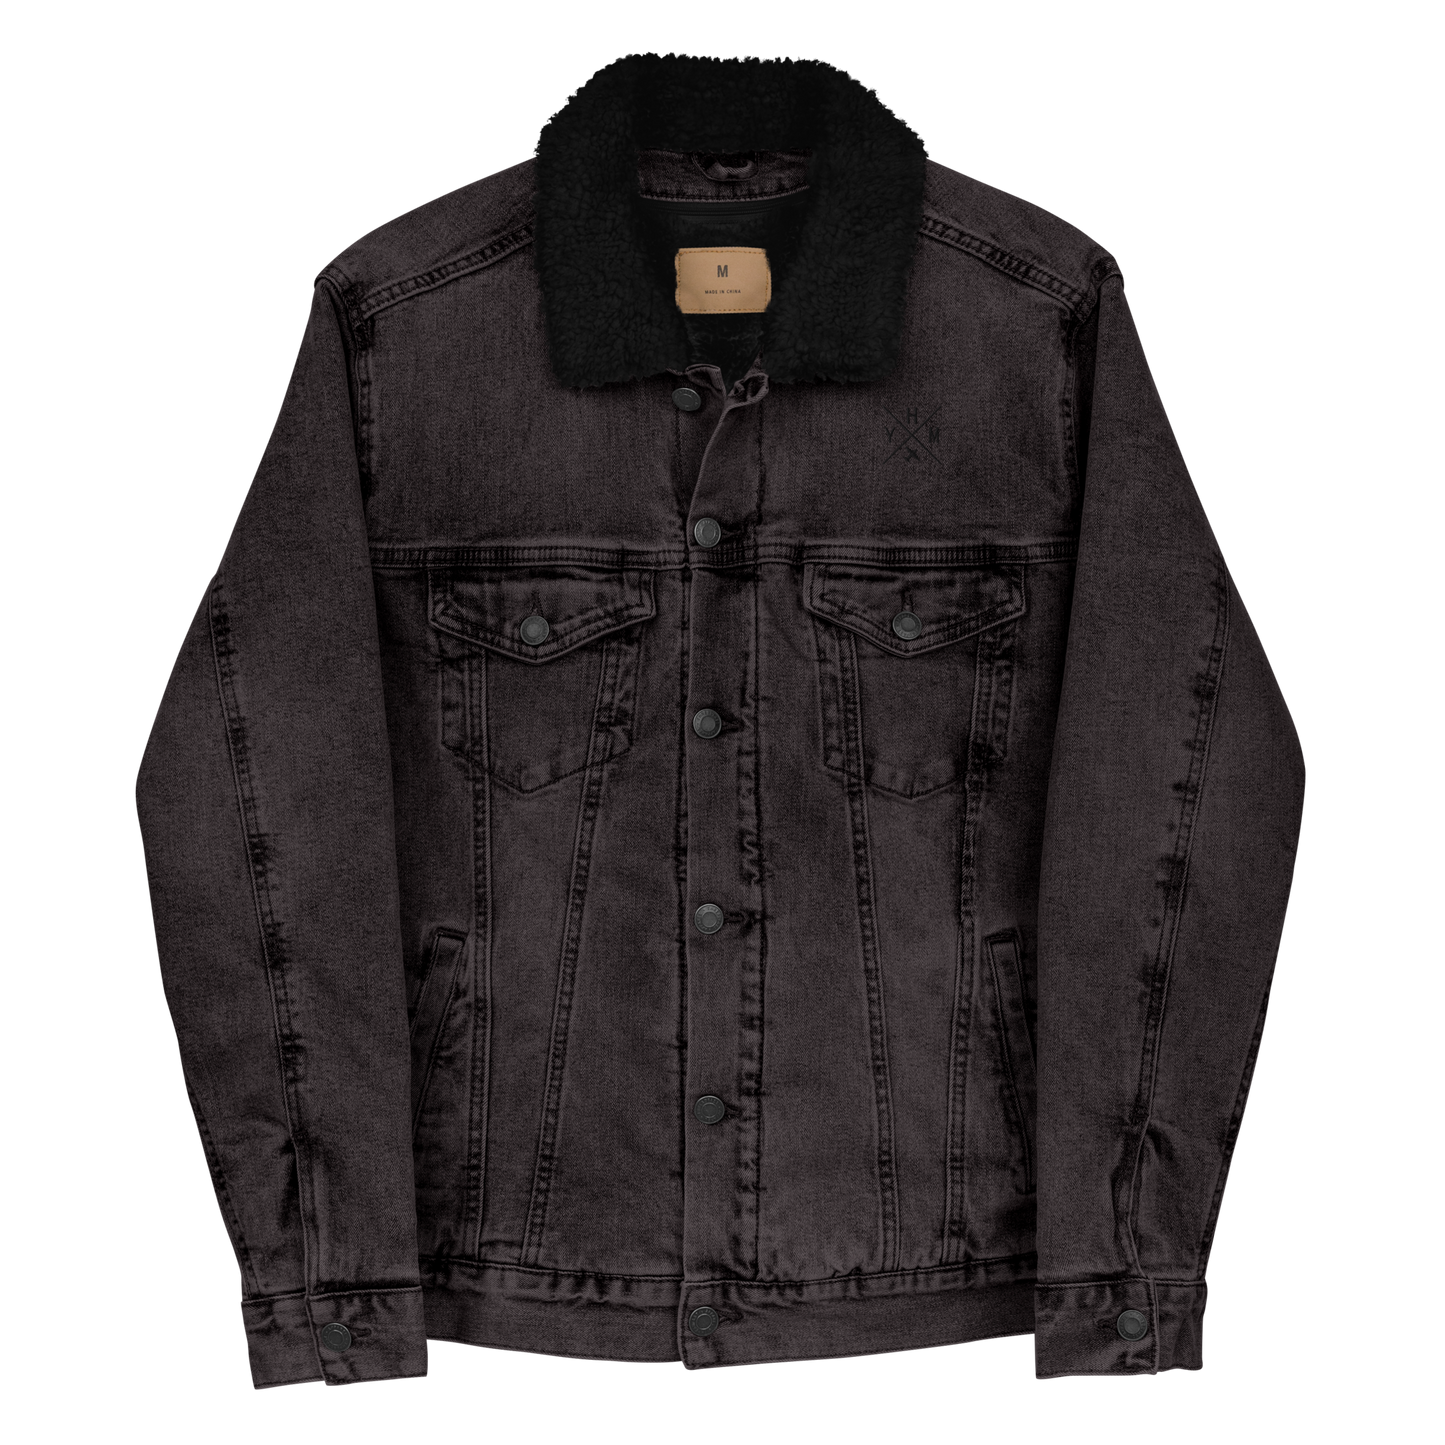 YHM Designs - YHM Hamilton Denim Sherpa Jacket - Crossed-X Design with Airport Code and Vintage Propliner - Black & White Embroidery - Image 06